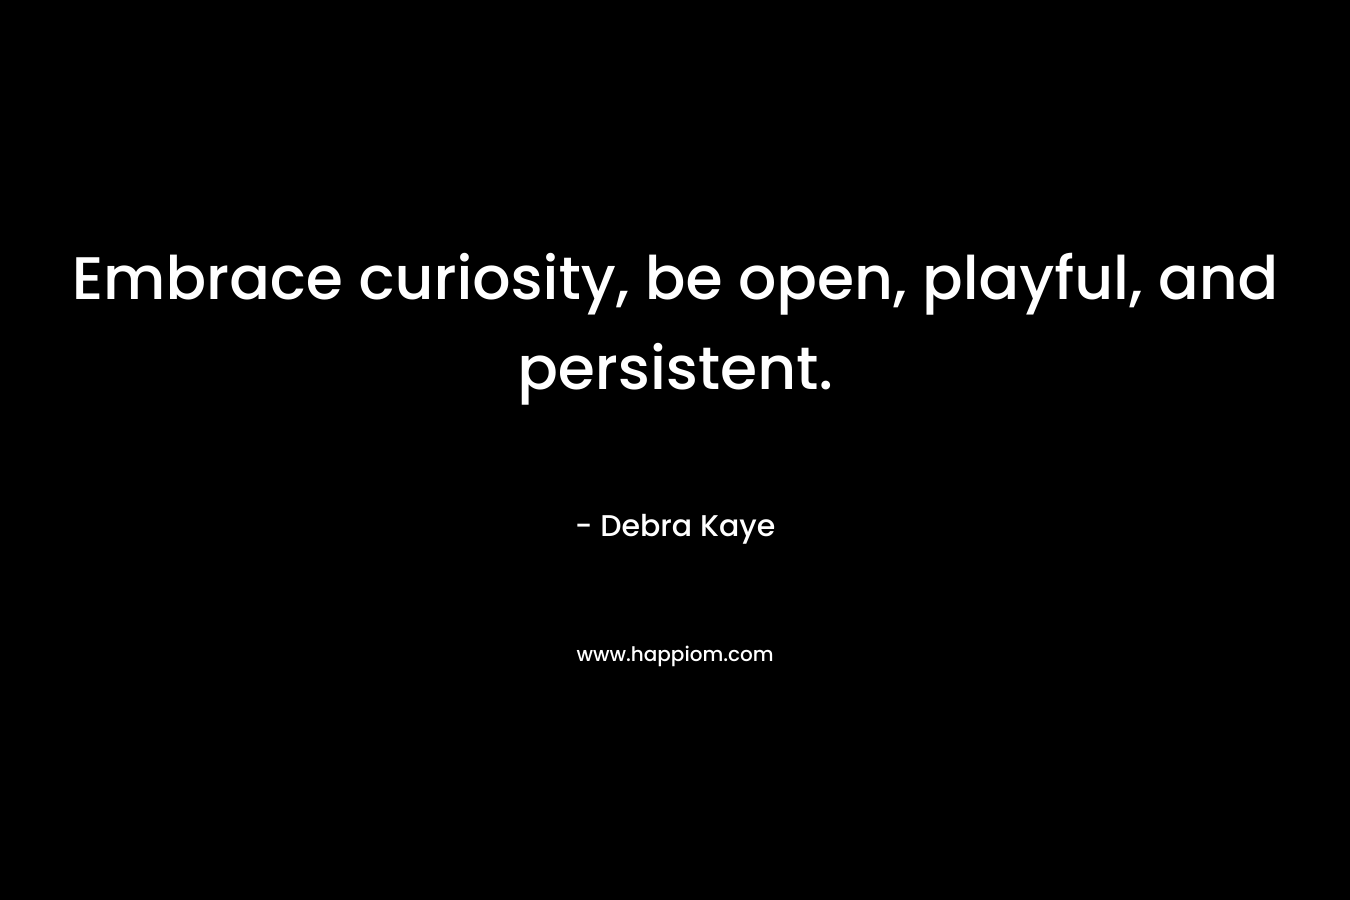 Embrace curiosity, be open, playful, and persistent. – Debra Kaye